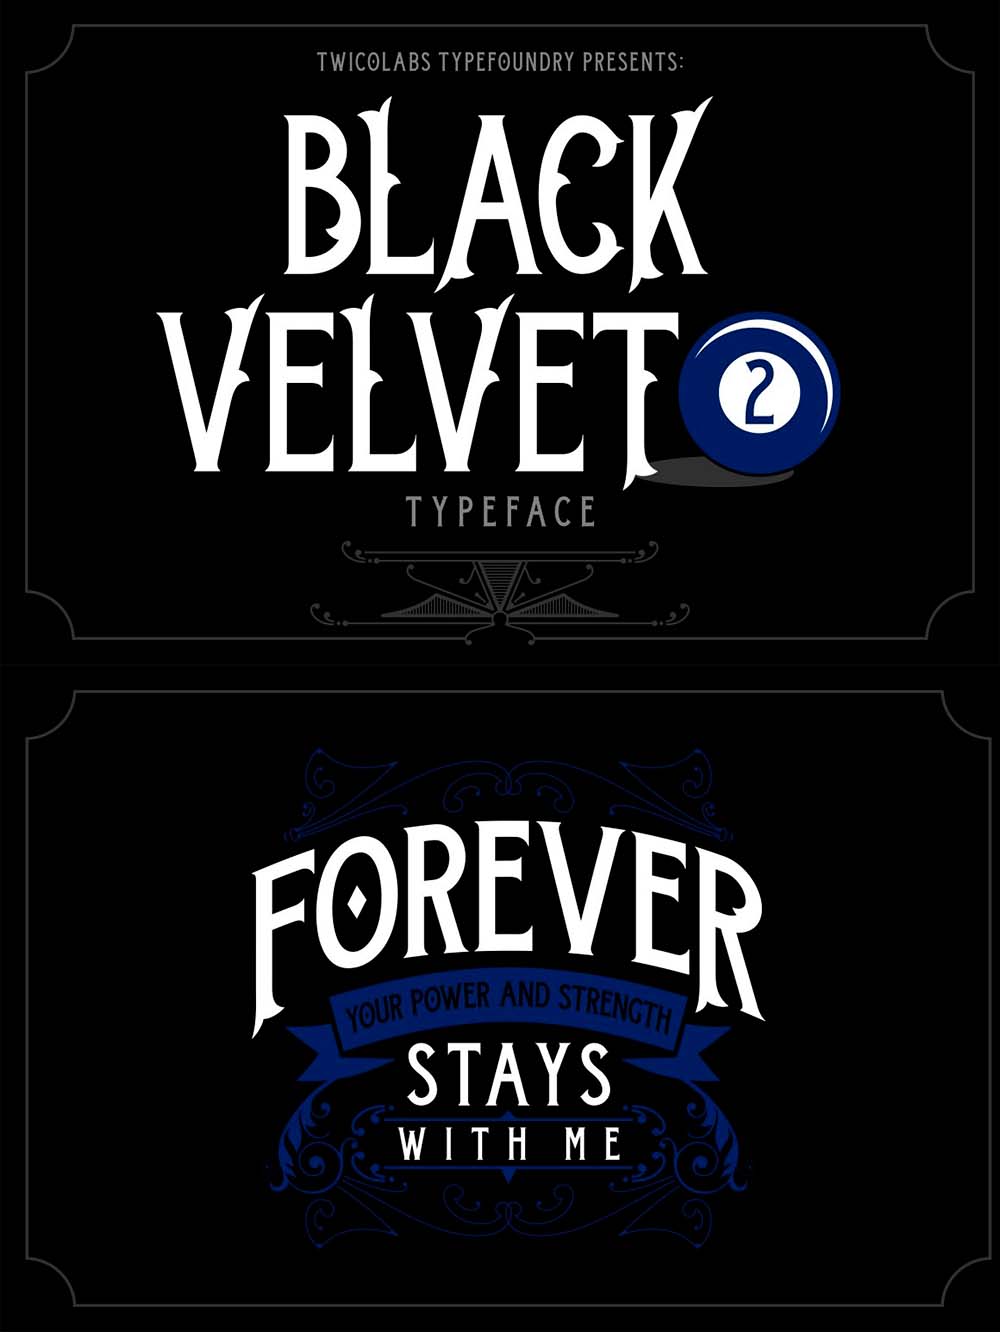 An image with text showing off the fabulous Black Velvet 2 font.